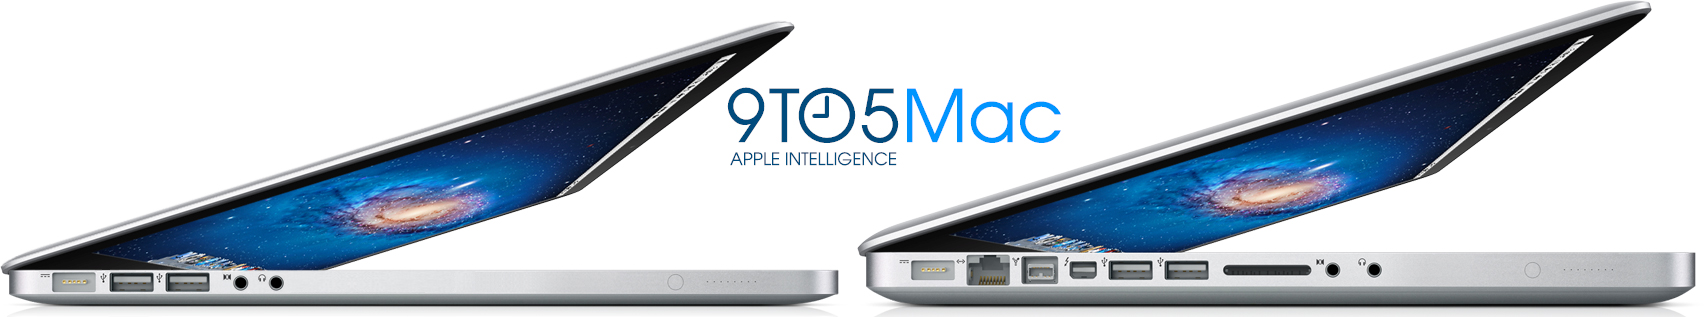 ↪ And here are the possible specifications of the new 15 ″ MacBooks Pro with Retina display!